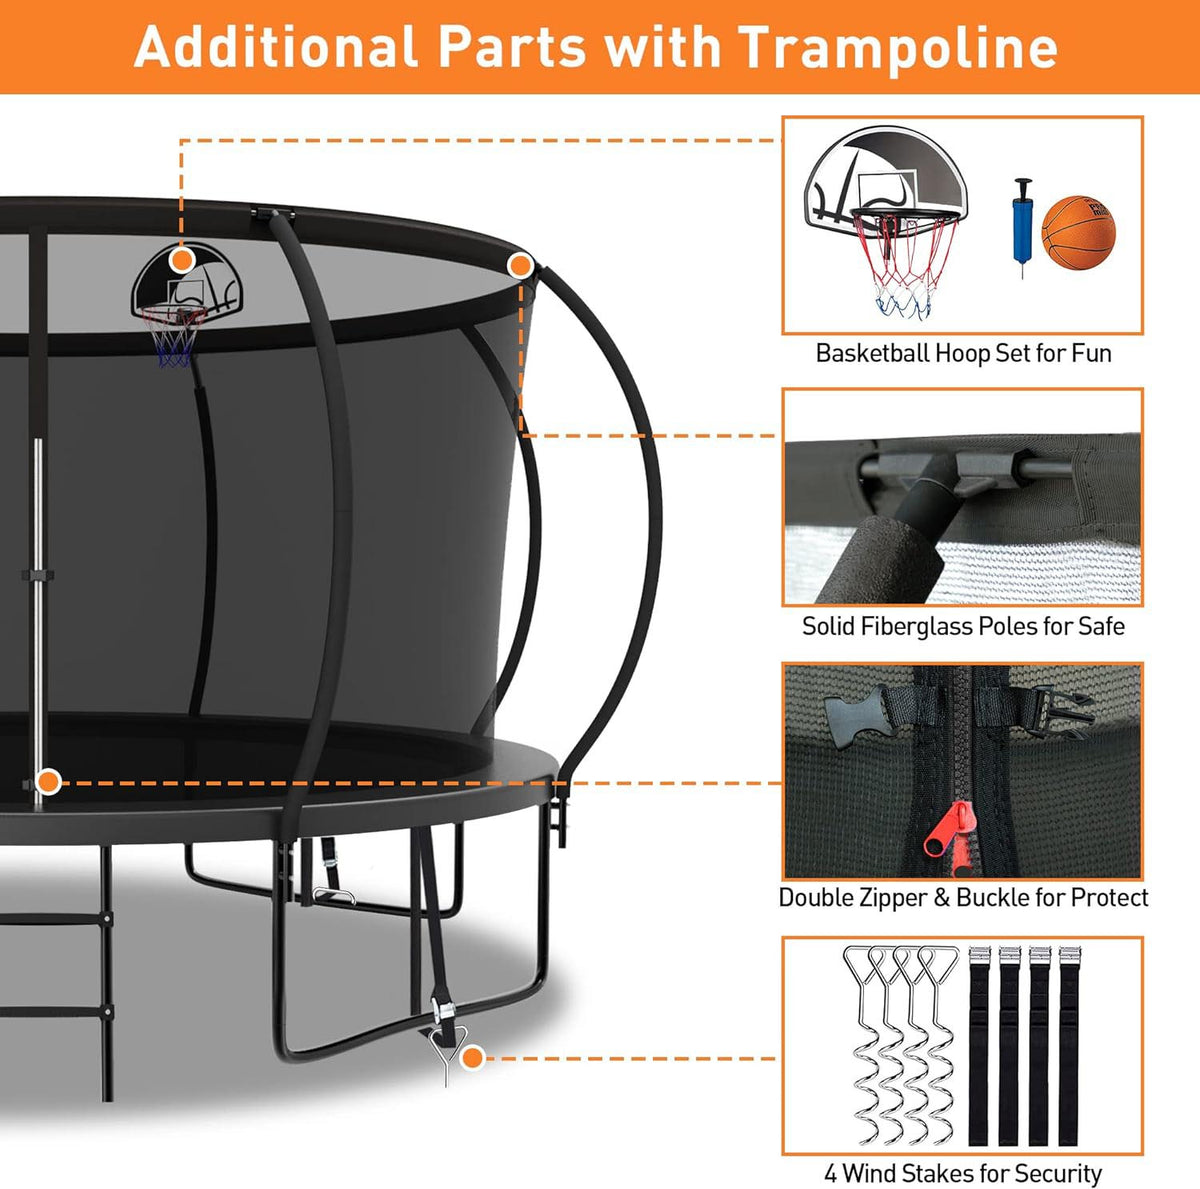 Springed-Trampoline-with-Enclosure-8ft-Round-Add-Ons